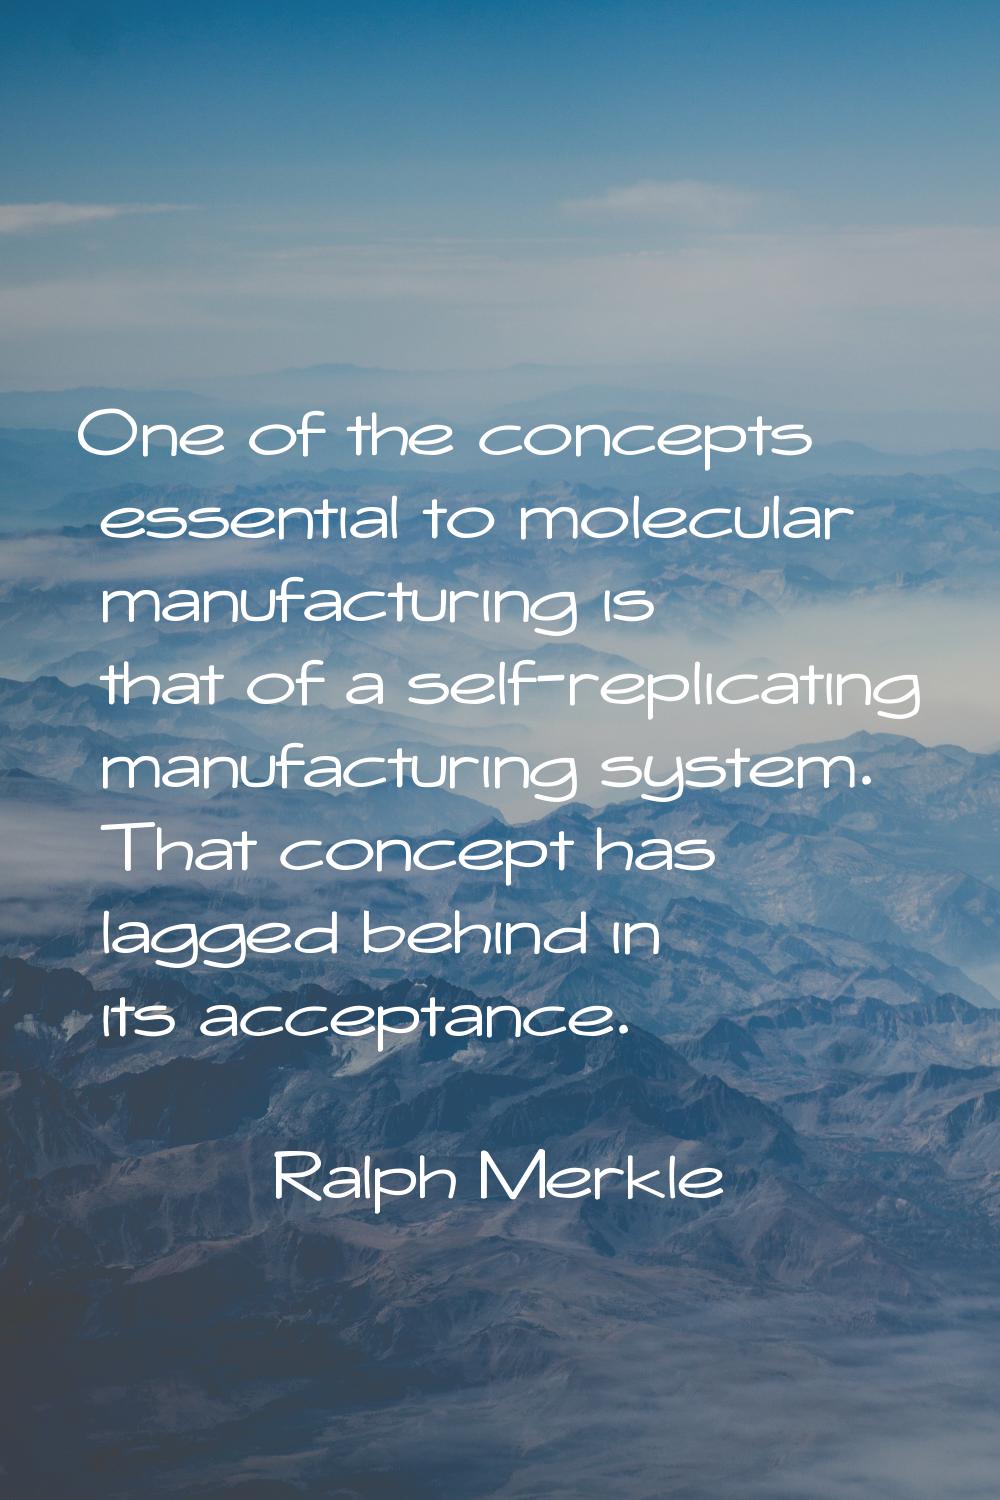 One of the concepts essential to molecular manufacturing is that of a self-replicating manufacturin